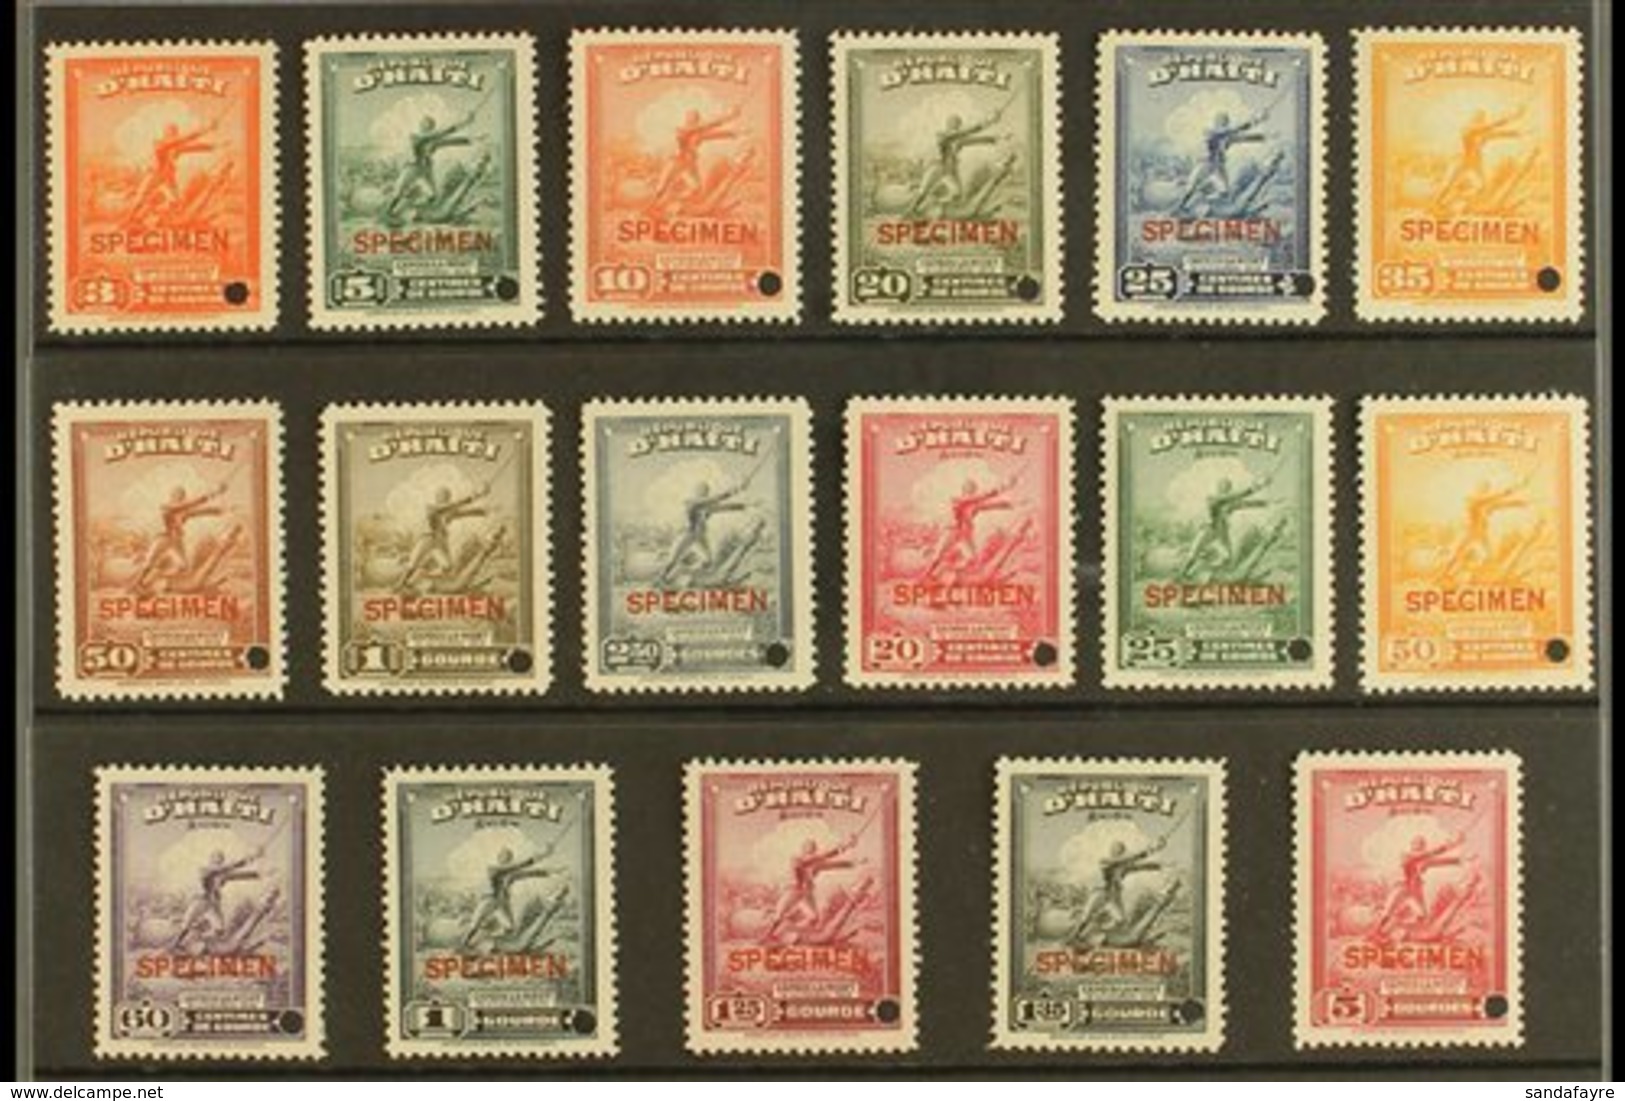 1946  "Capois-la-Mort" Postage And Air Complete Set, SG 400/16, Overprinted "SPECIMEN" And With Security Punch Hole, Nev - Haïti